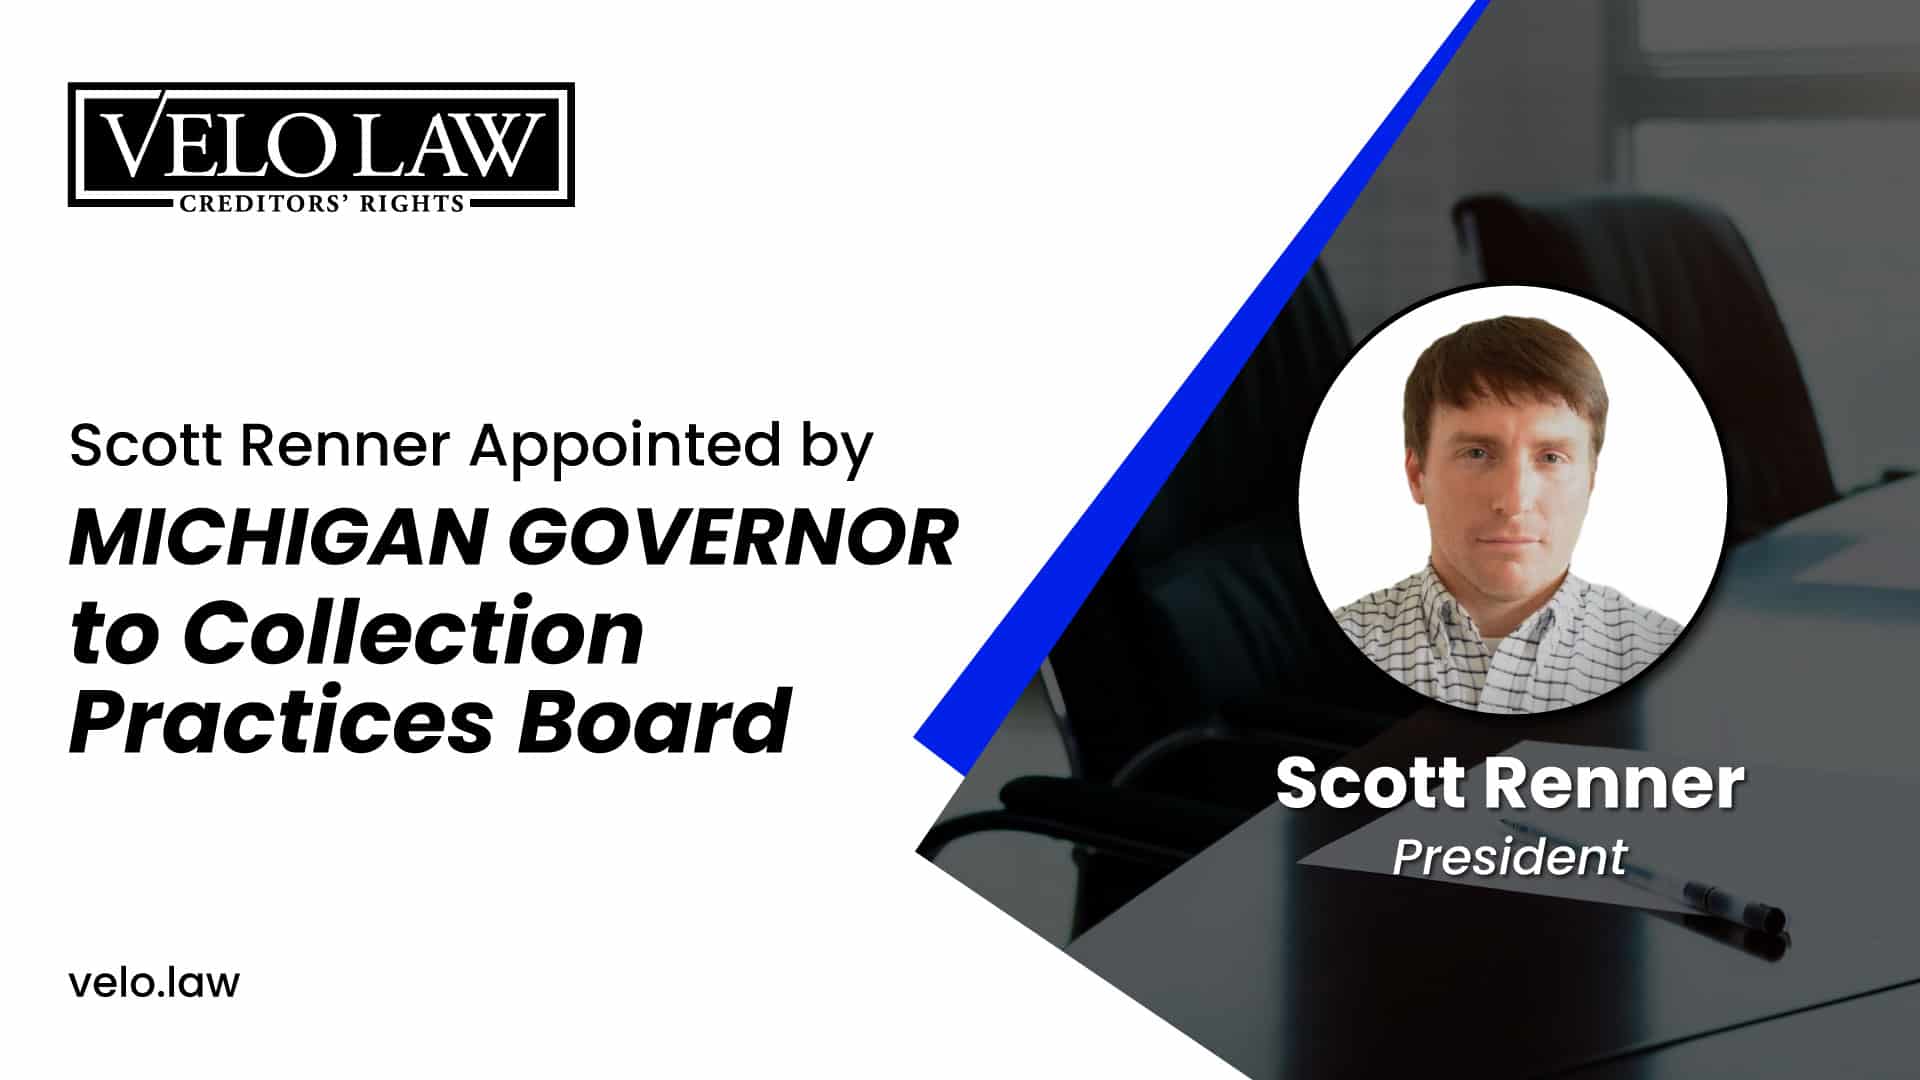 Scott Renner Appointed by Michigan Governor to Collection Practices Board